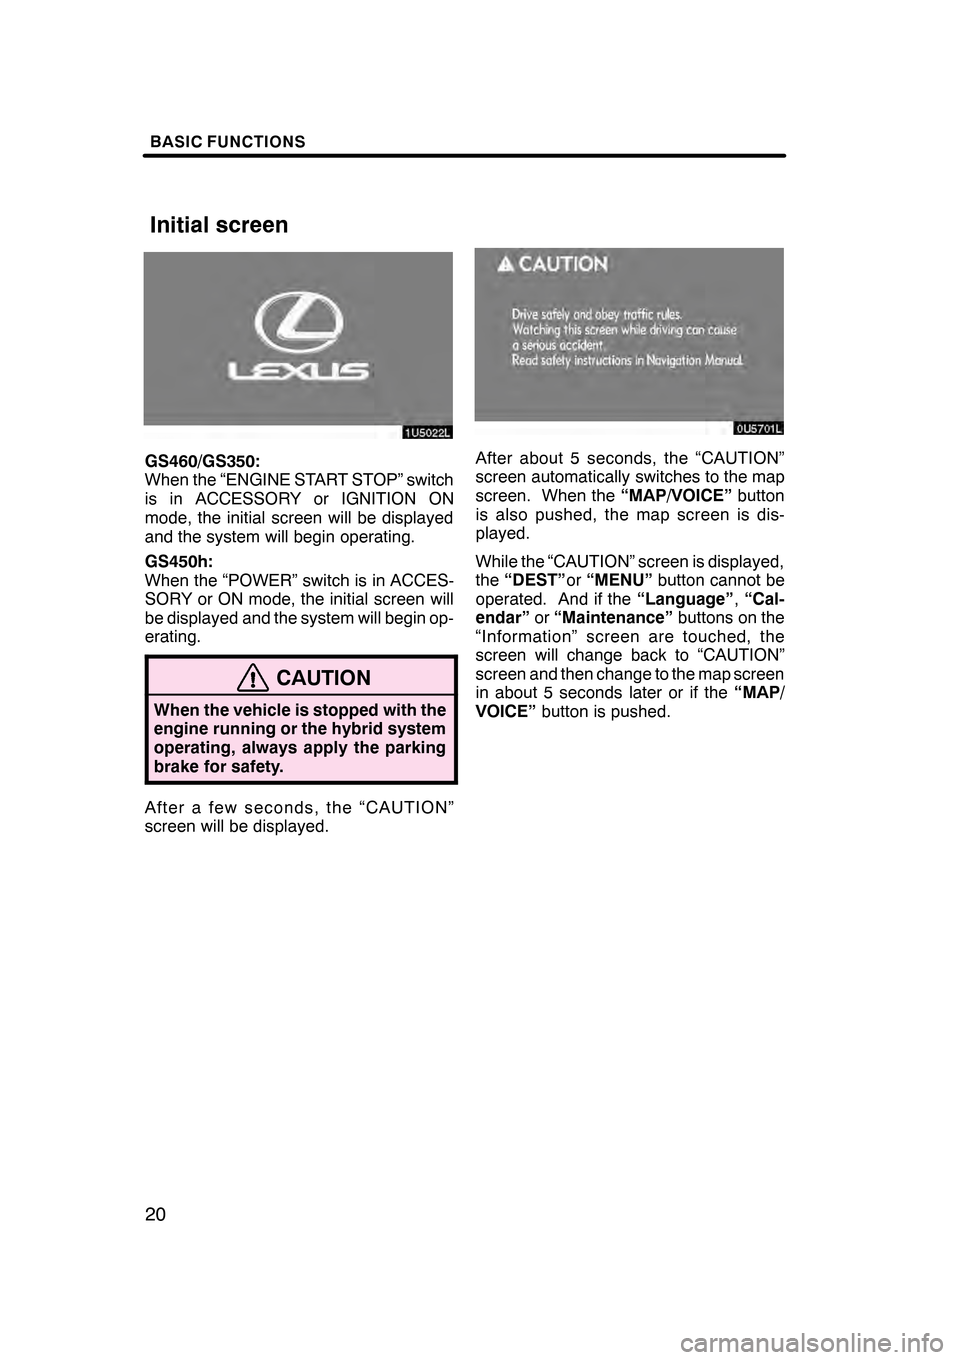 Lexus GS350 2008  Navigation Manual BASIC FUNCTIONS
20
GS460/GS350:
When the “ENGINE START STOP” switch
is in ACCESSORY or IGNITION ON
mode, the initial screen will be displayed
and the system will begin operating.
GS450h:
When the 